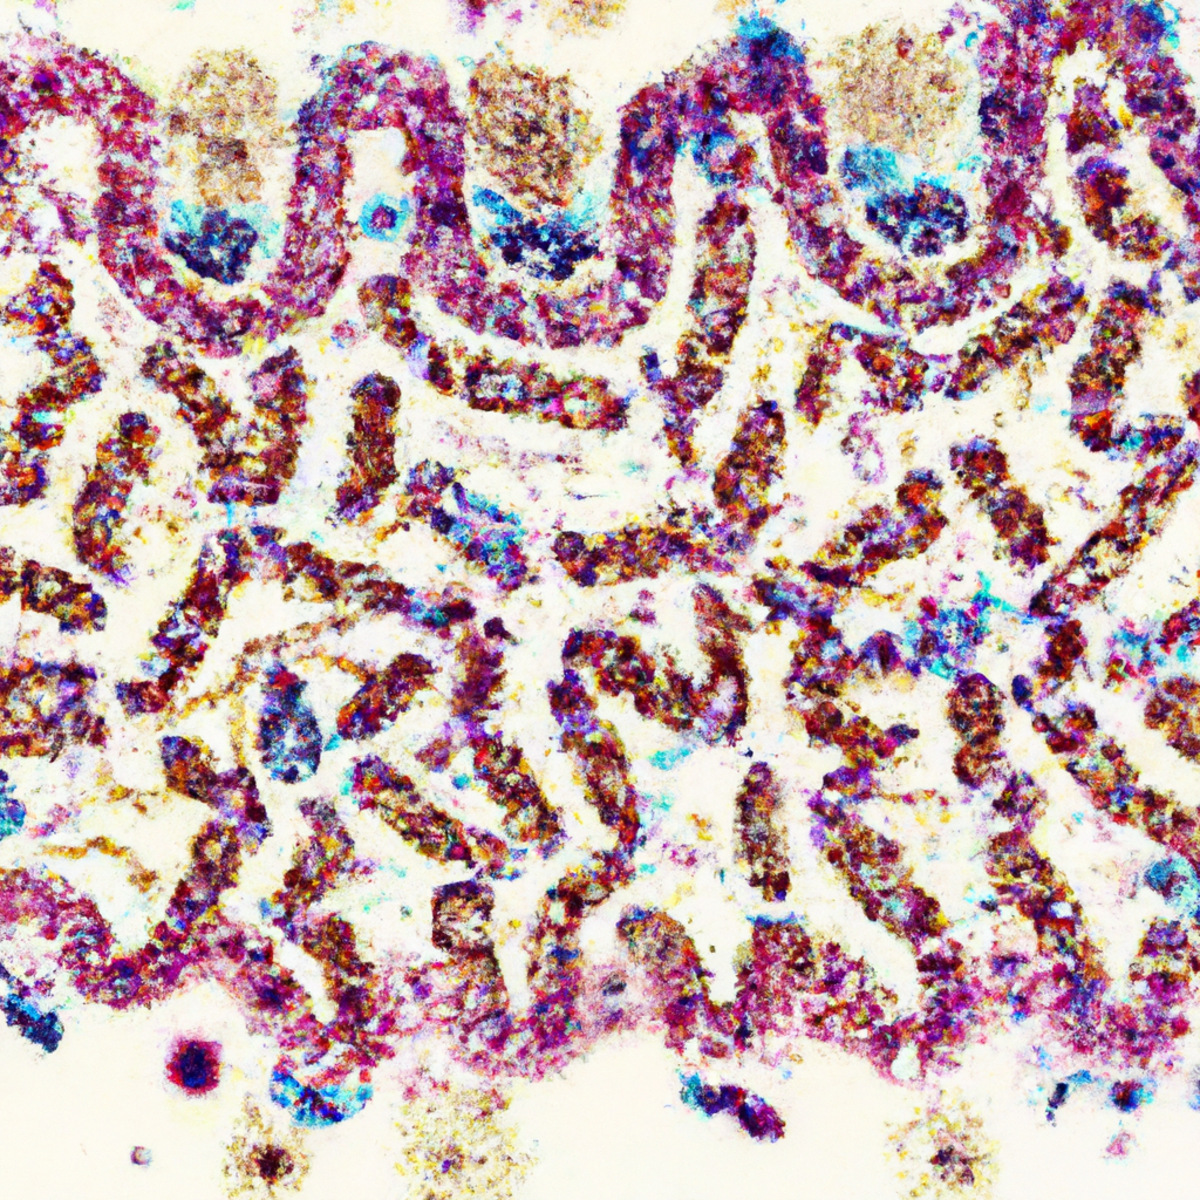 Microscopic schistosome eggs in stained tissue samples, highlighting spleen's role in schistosomiasis progression.